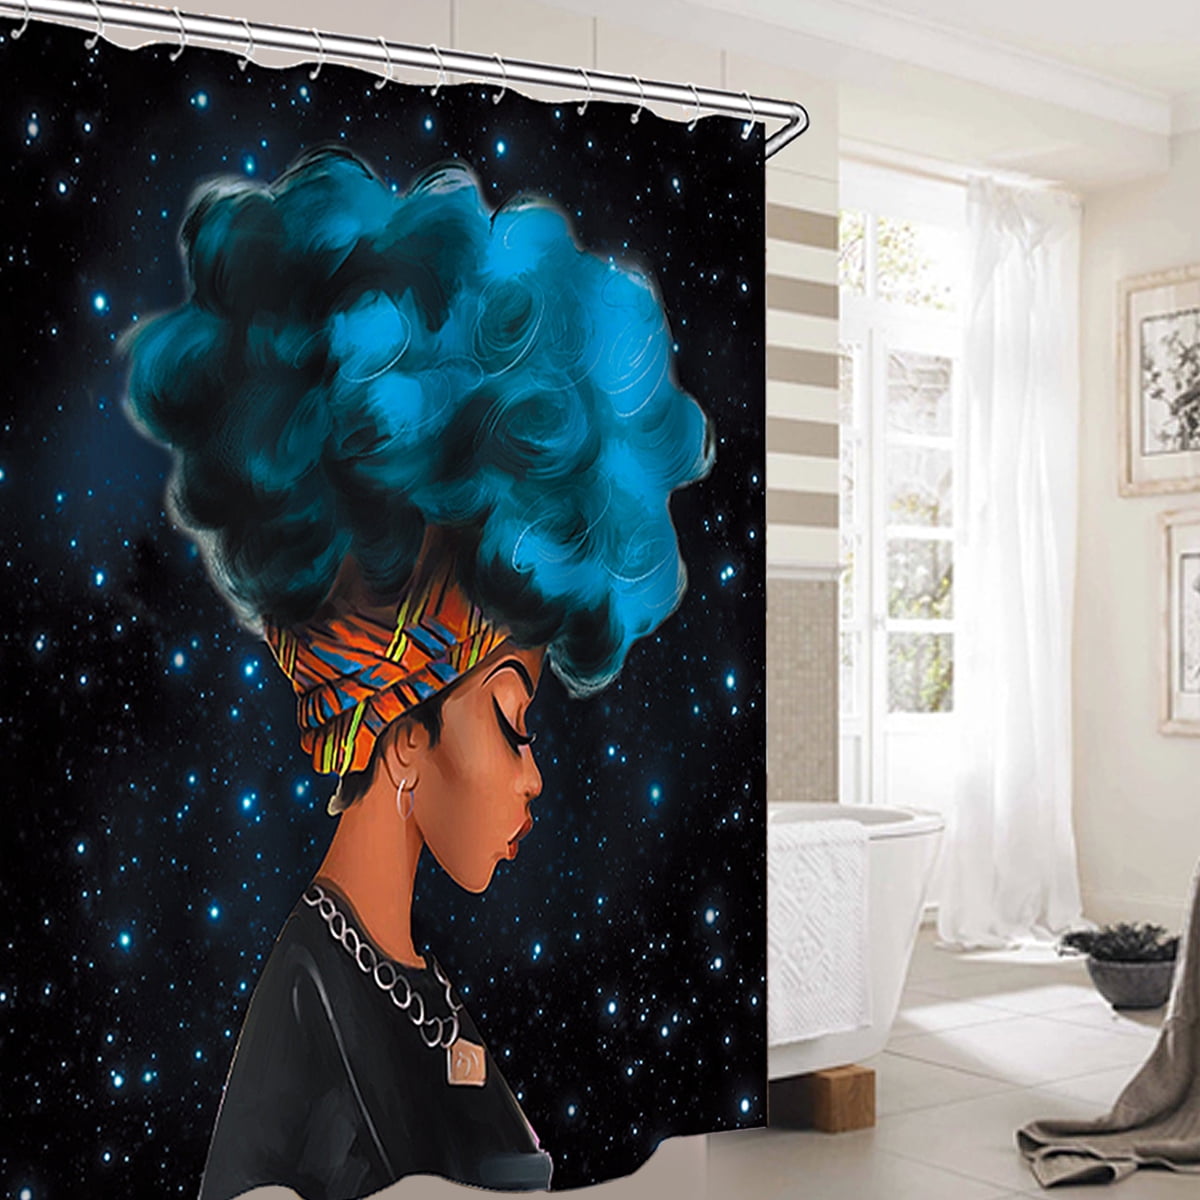 Afro Female Shower Curtain Bathroom Hippie Waterproof Curtain Decor With Hook 